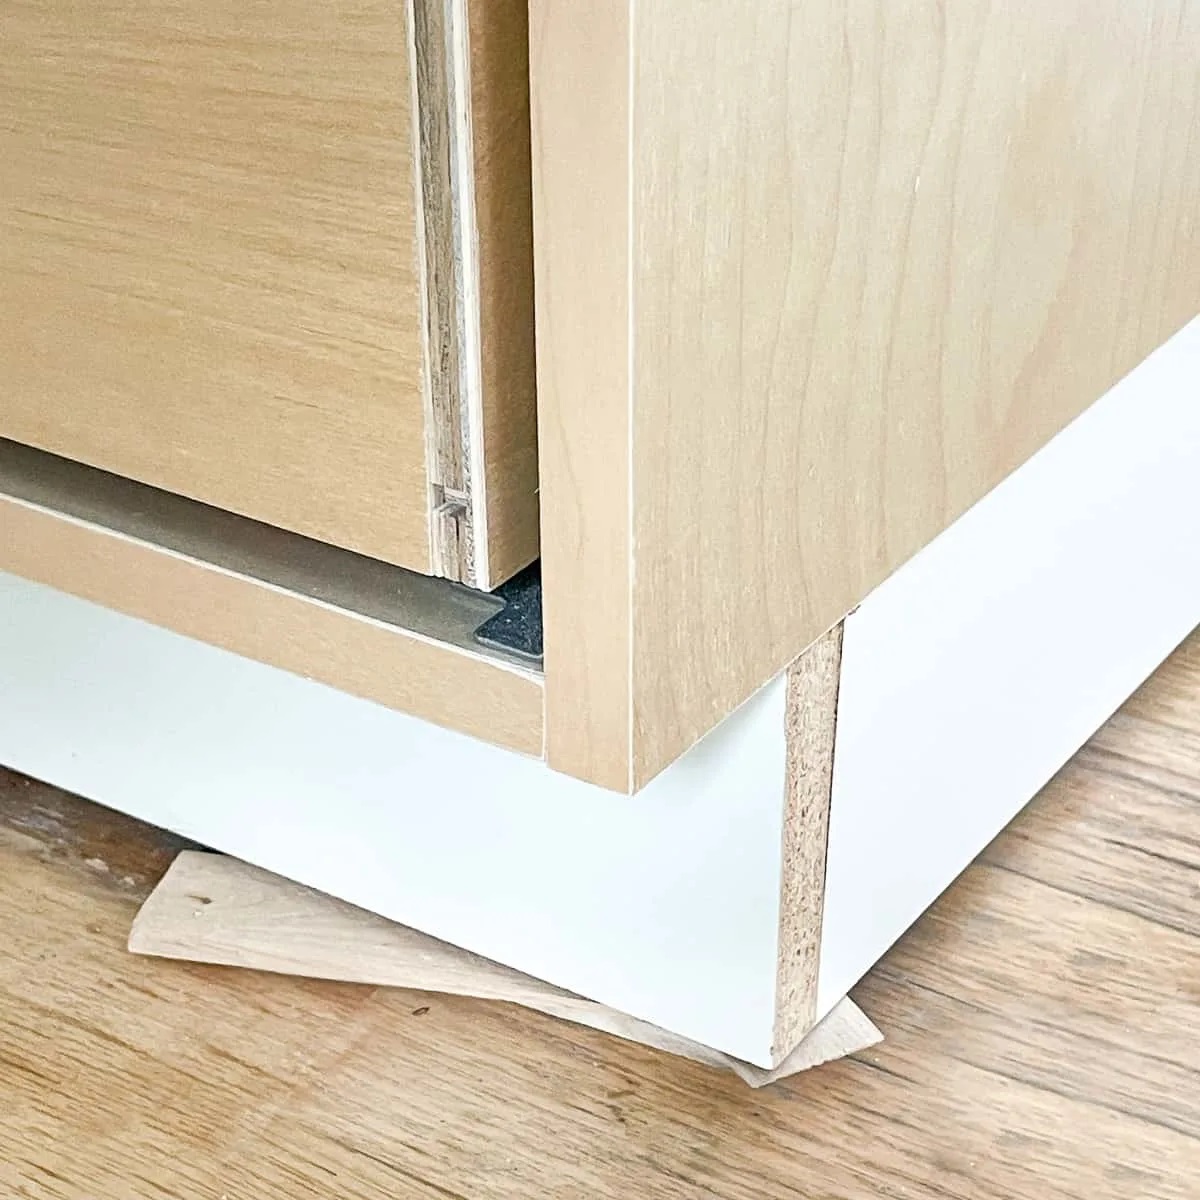 How To Install A Cabinet Pantry Toe Kick